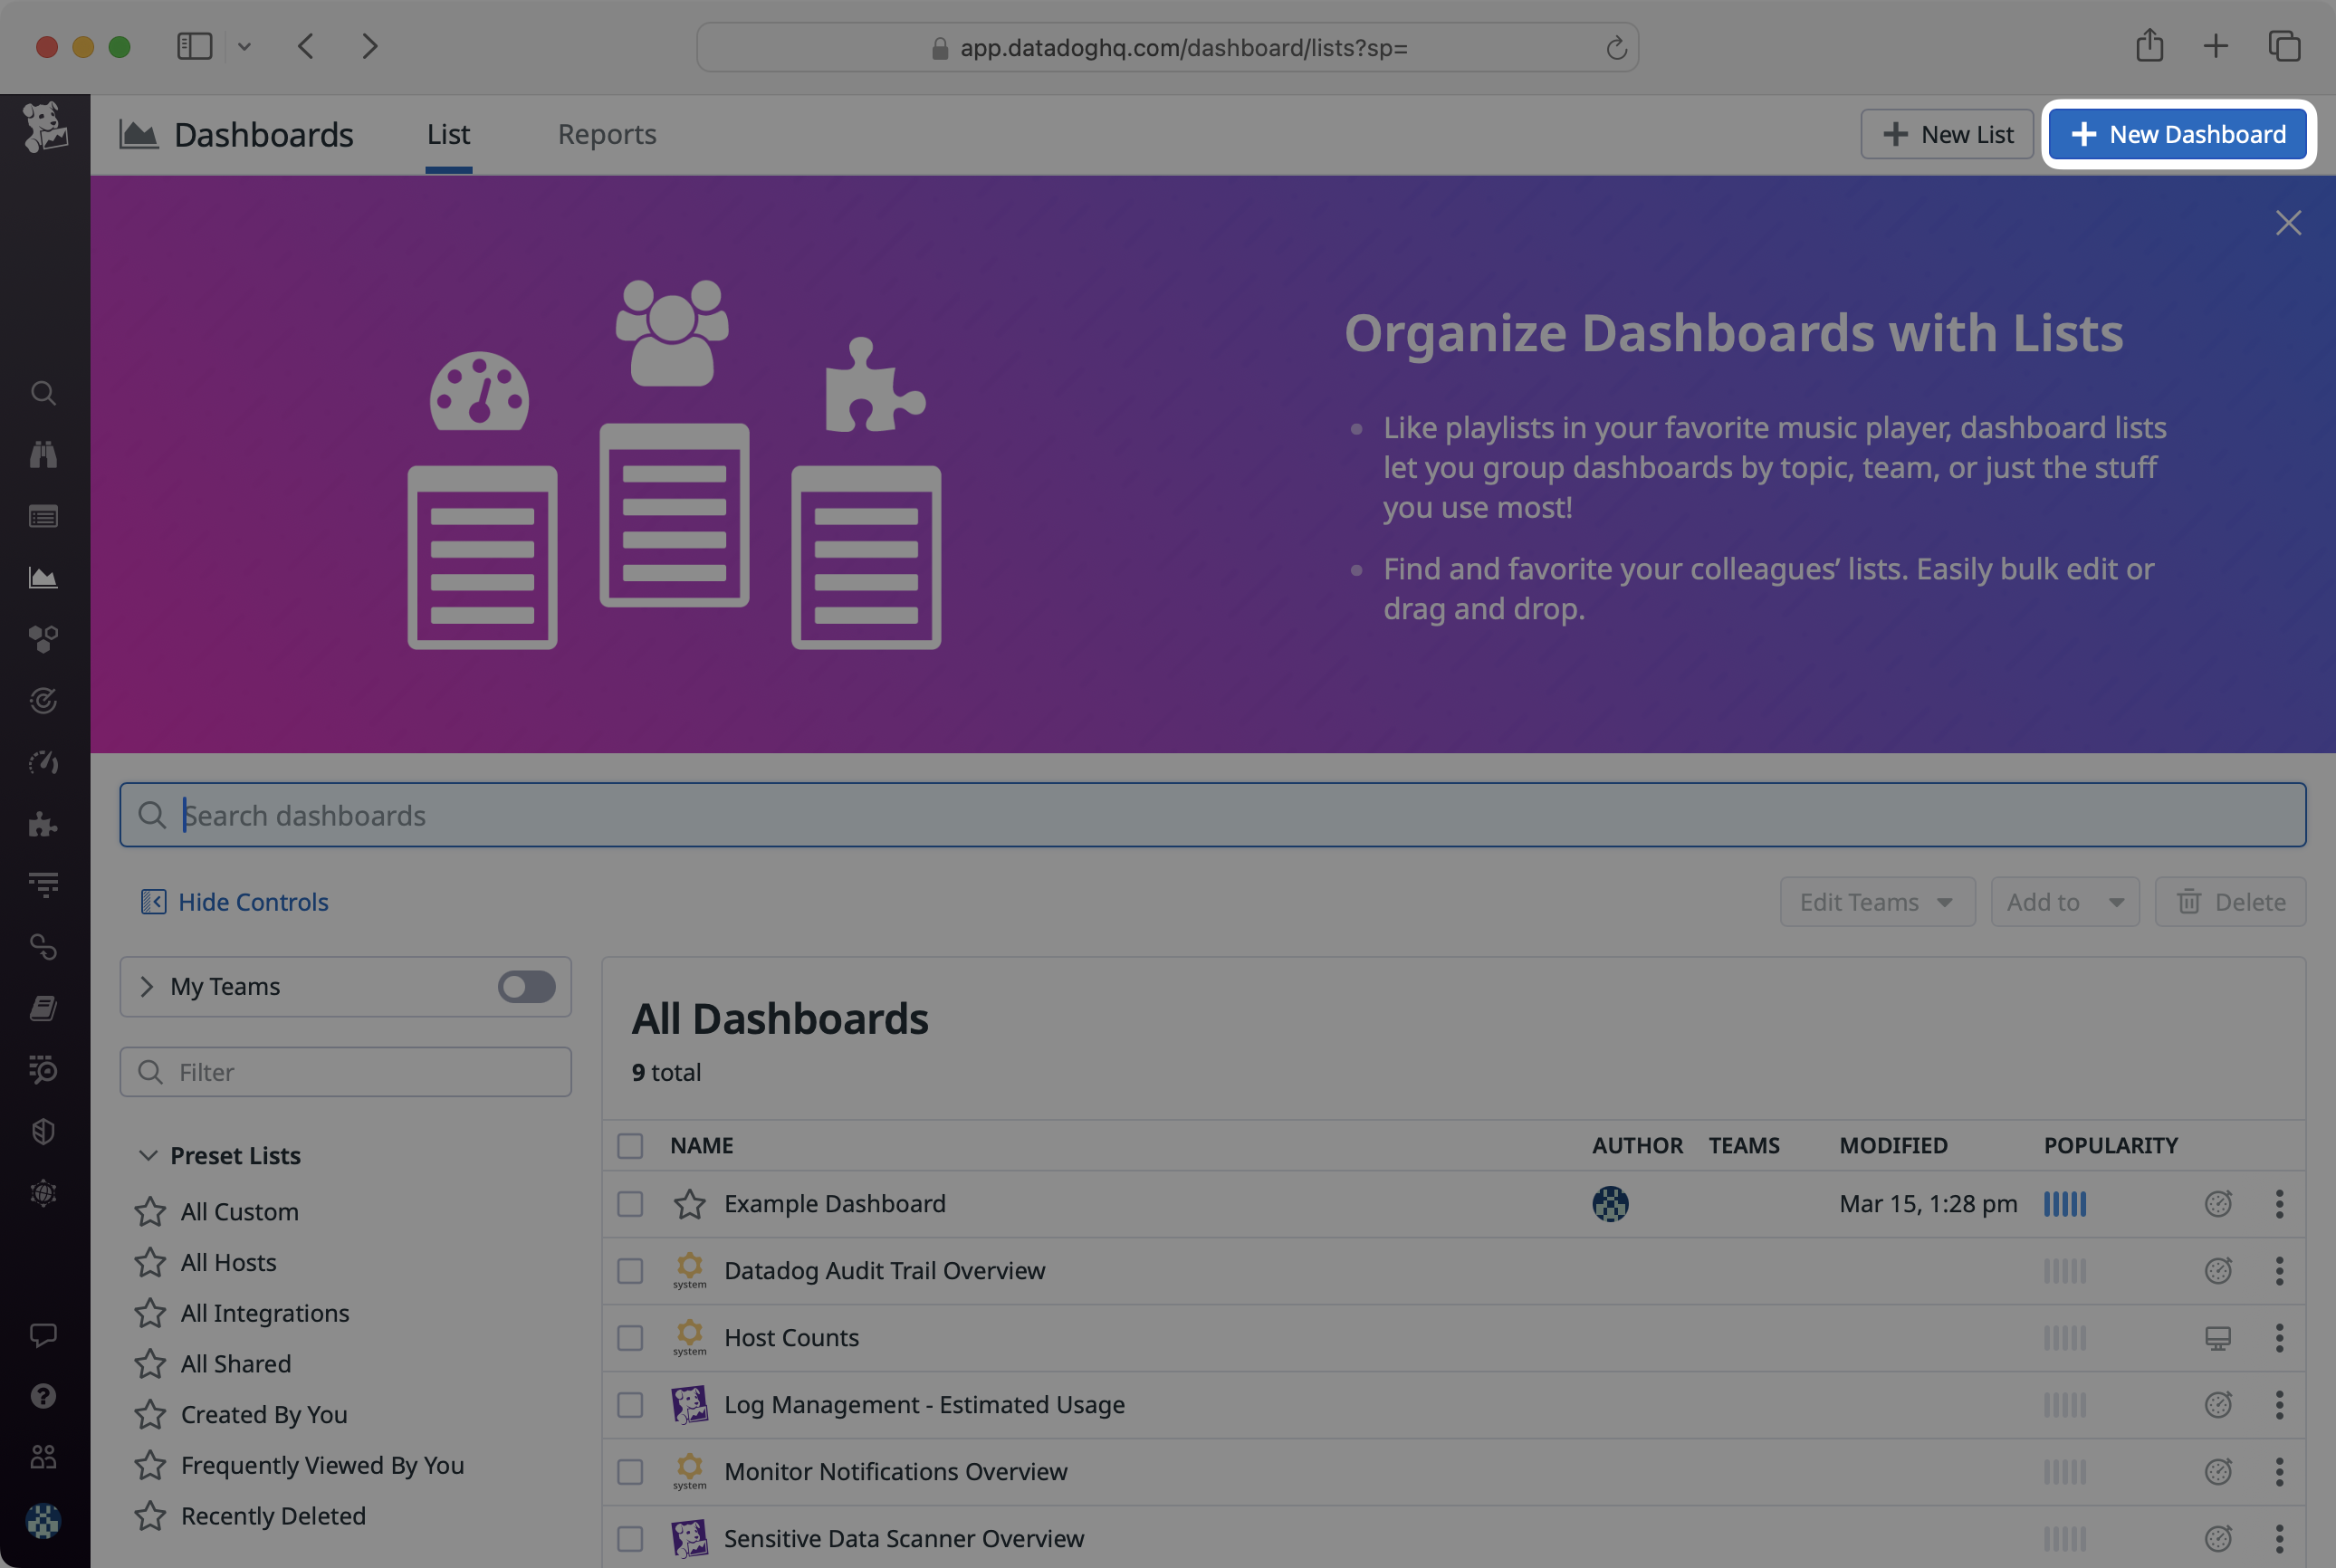 A screenshot showing how to create a new dashboard in Datadog.